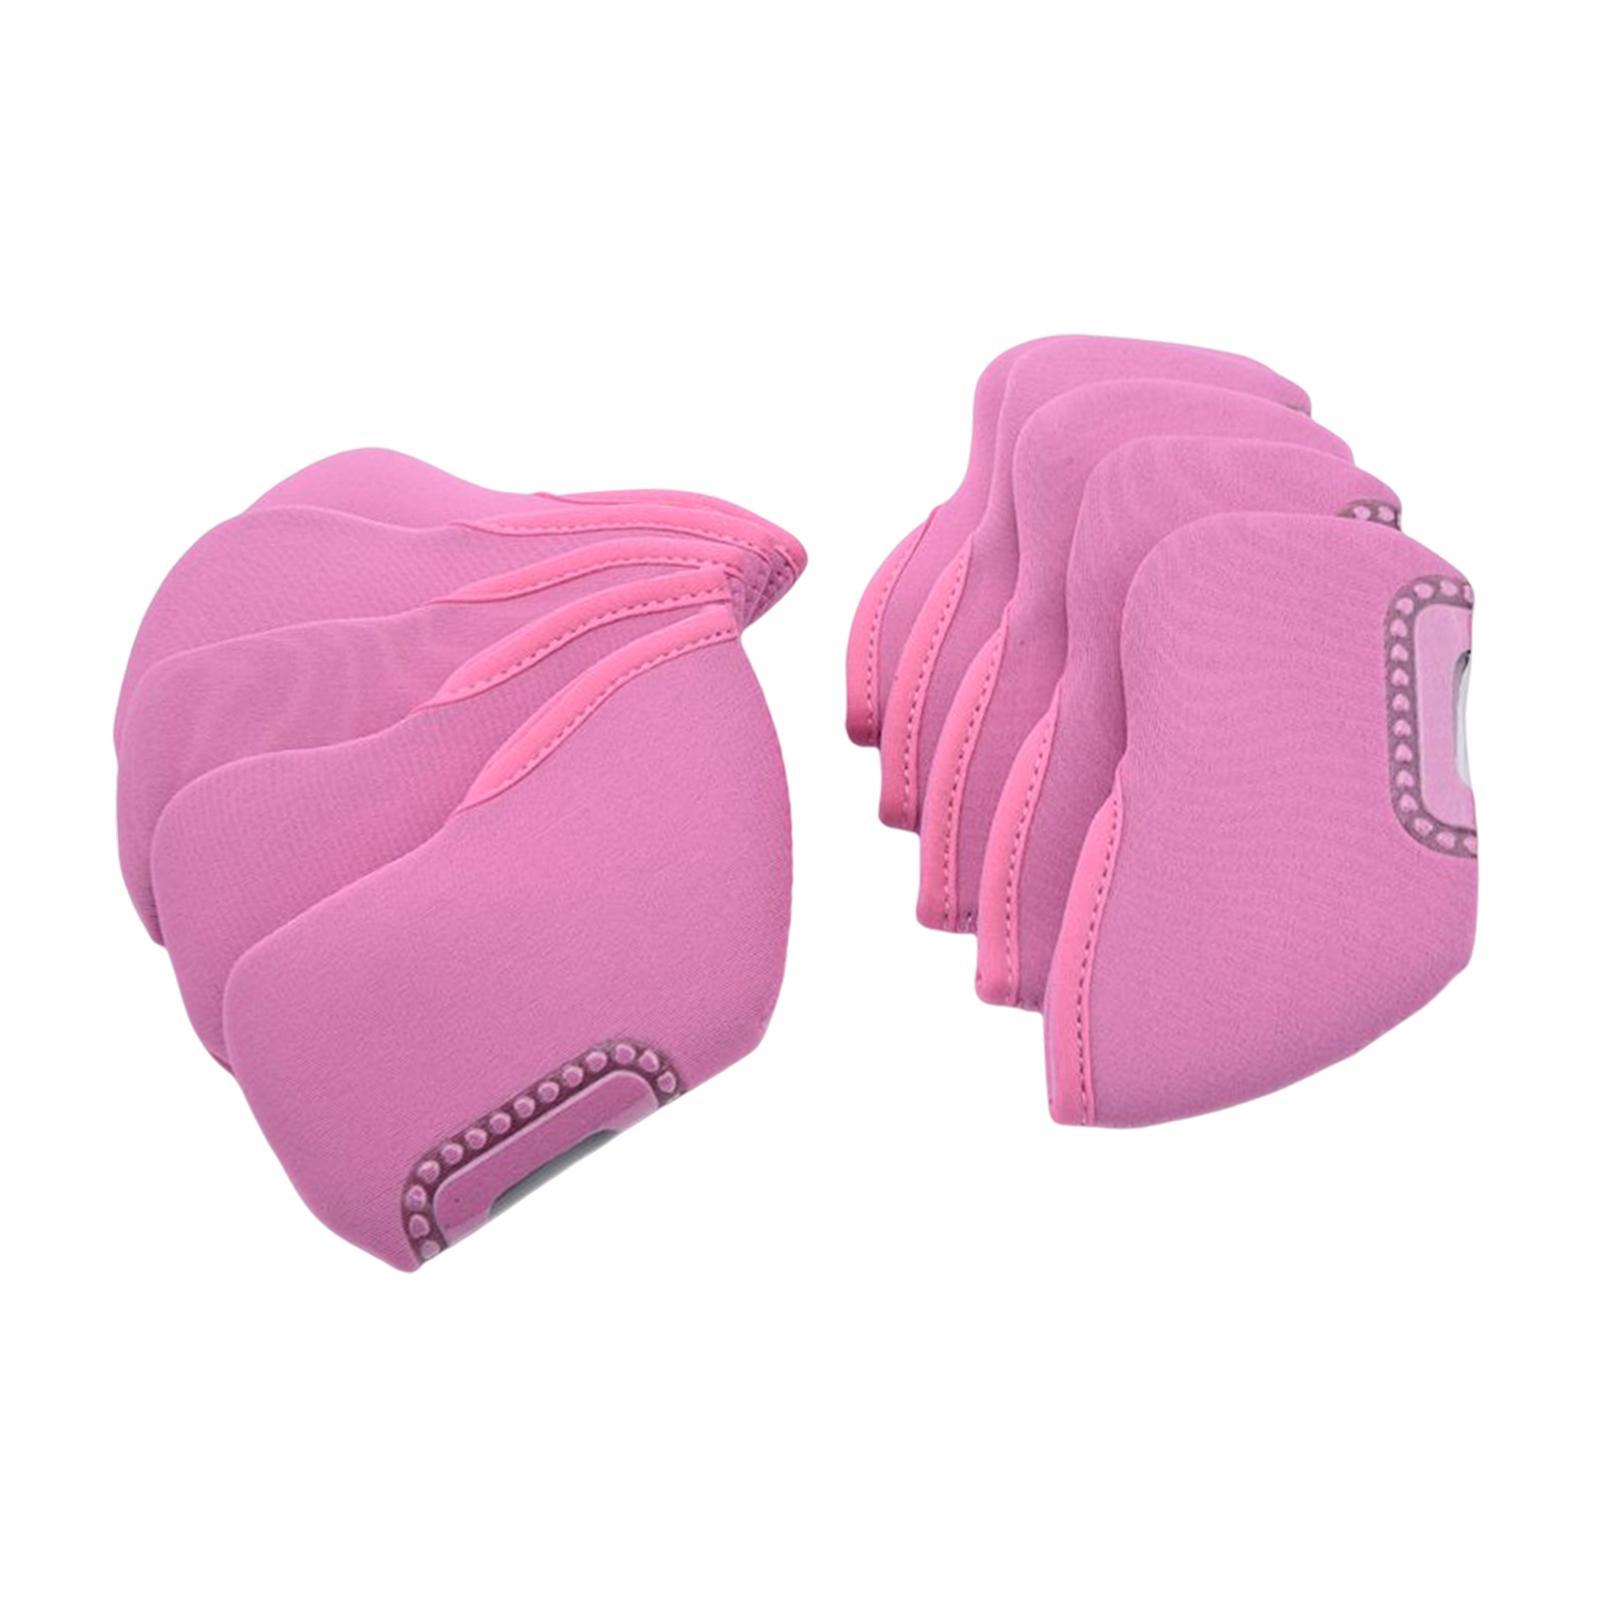 10Pcs Golf Iron Club Head Covers Golf Headcover Waterproof Golf Club Head Cover for Outdoor Sports